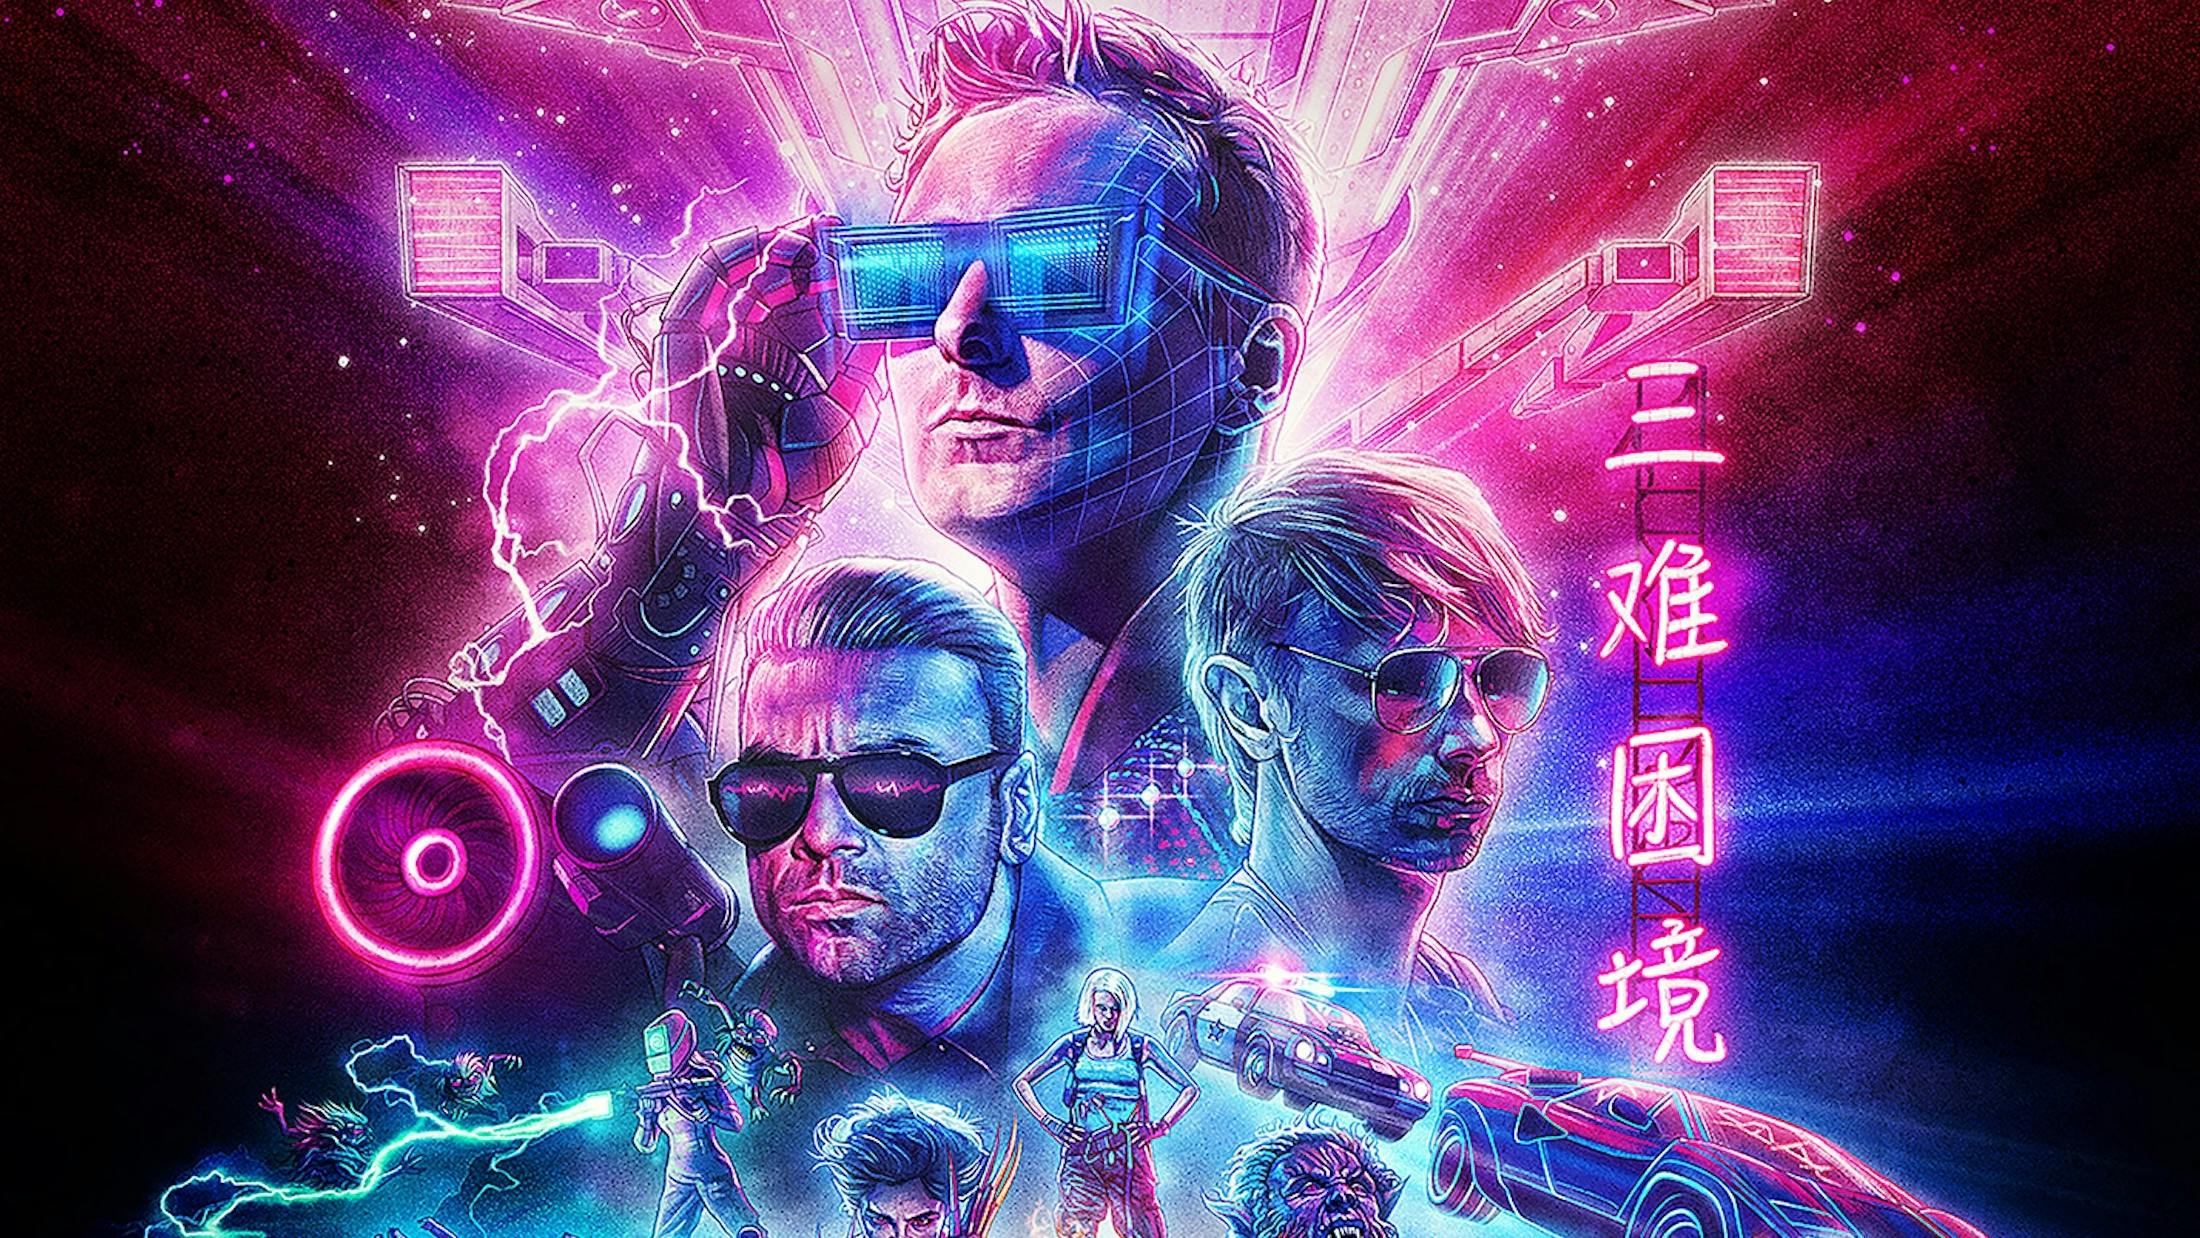 Muse Collaborate With Stranger Things Artist For Simulation Theory Artwork